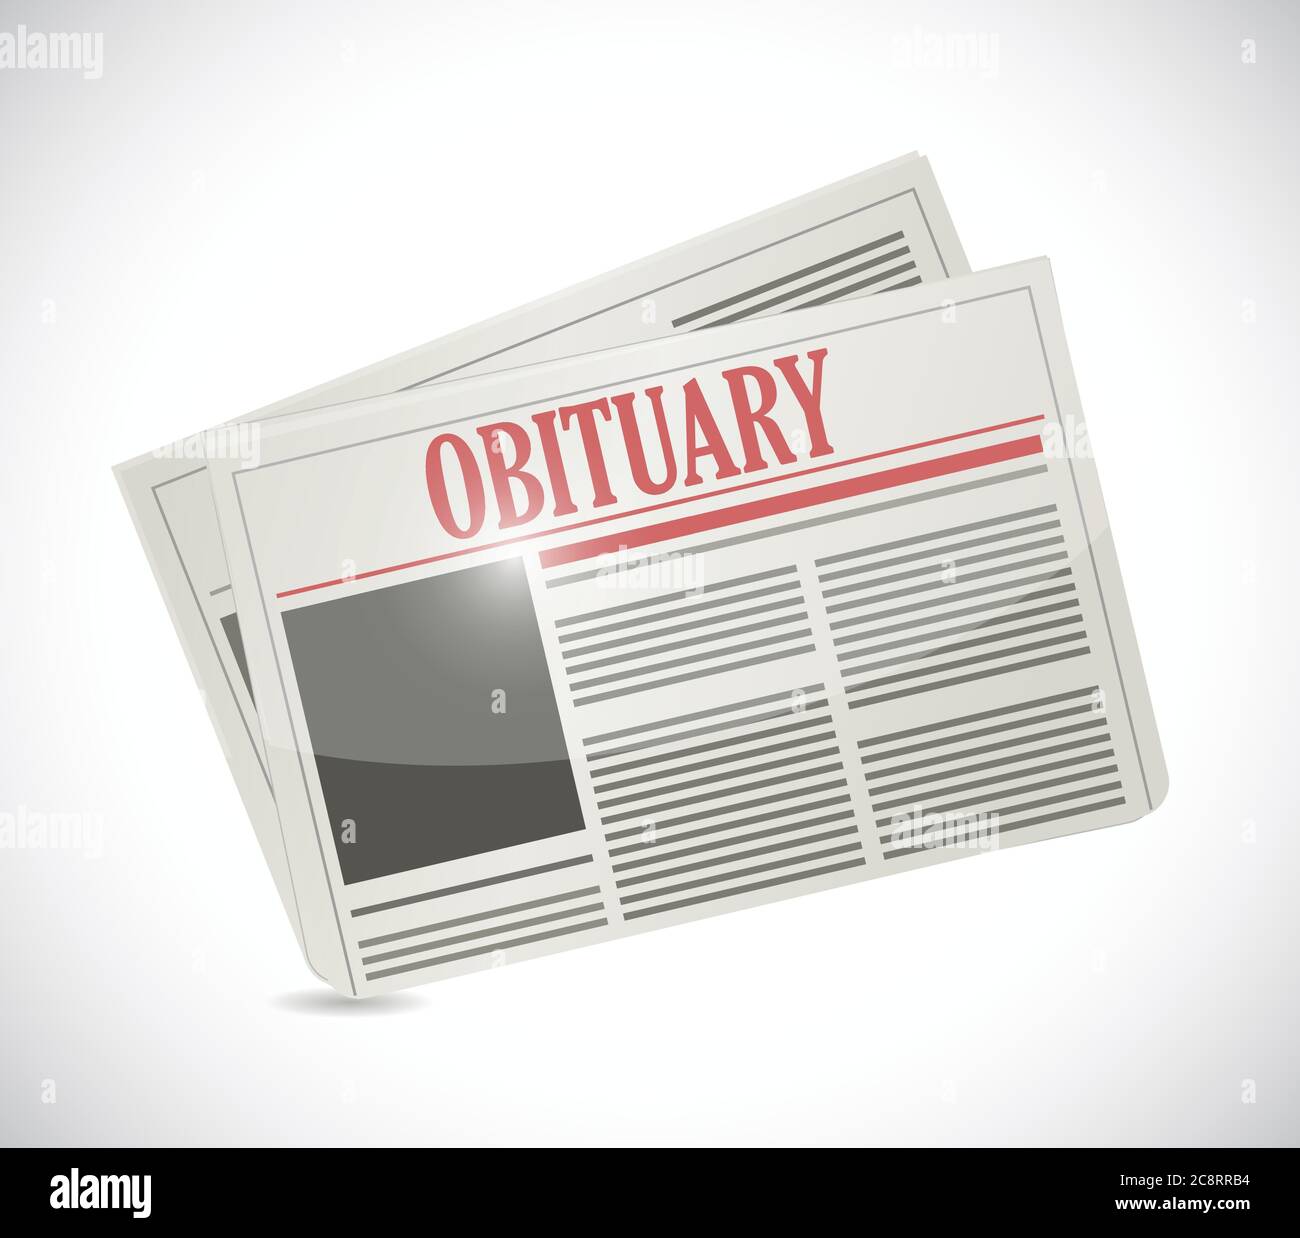 Obituary newspaper section illustration design over a white background Stock Vector